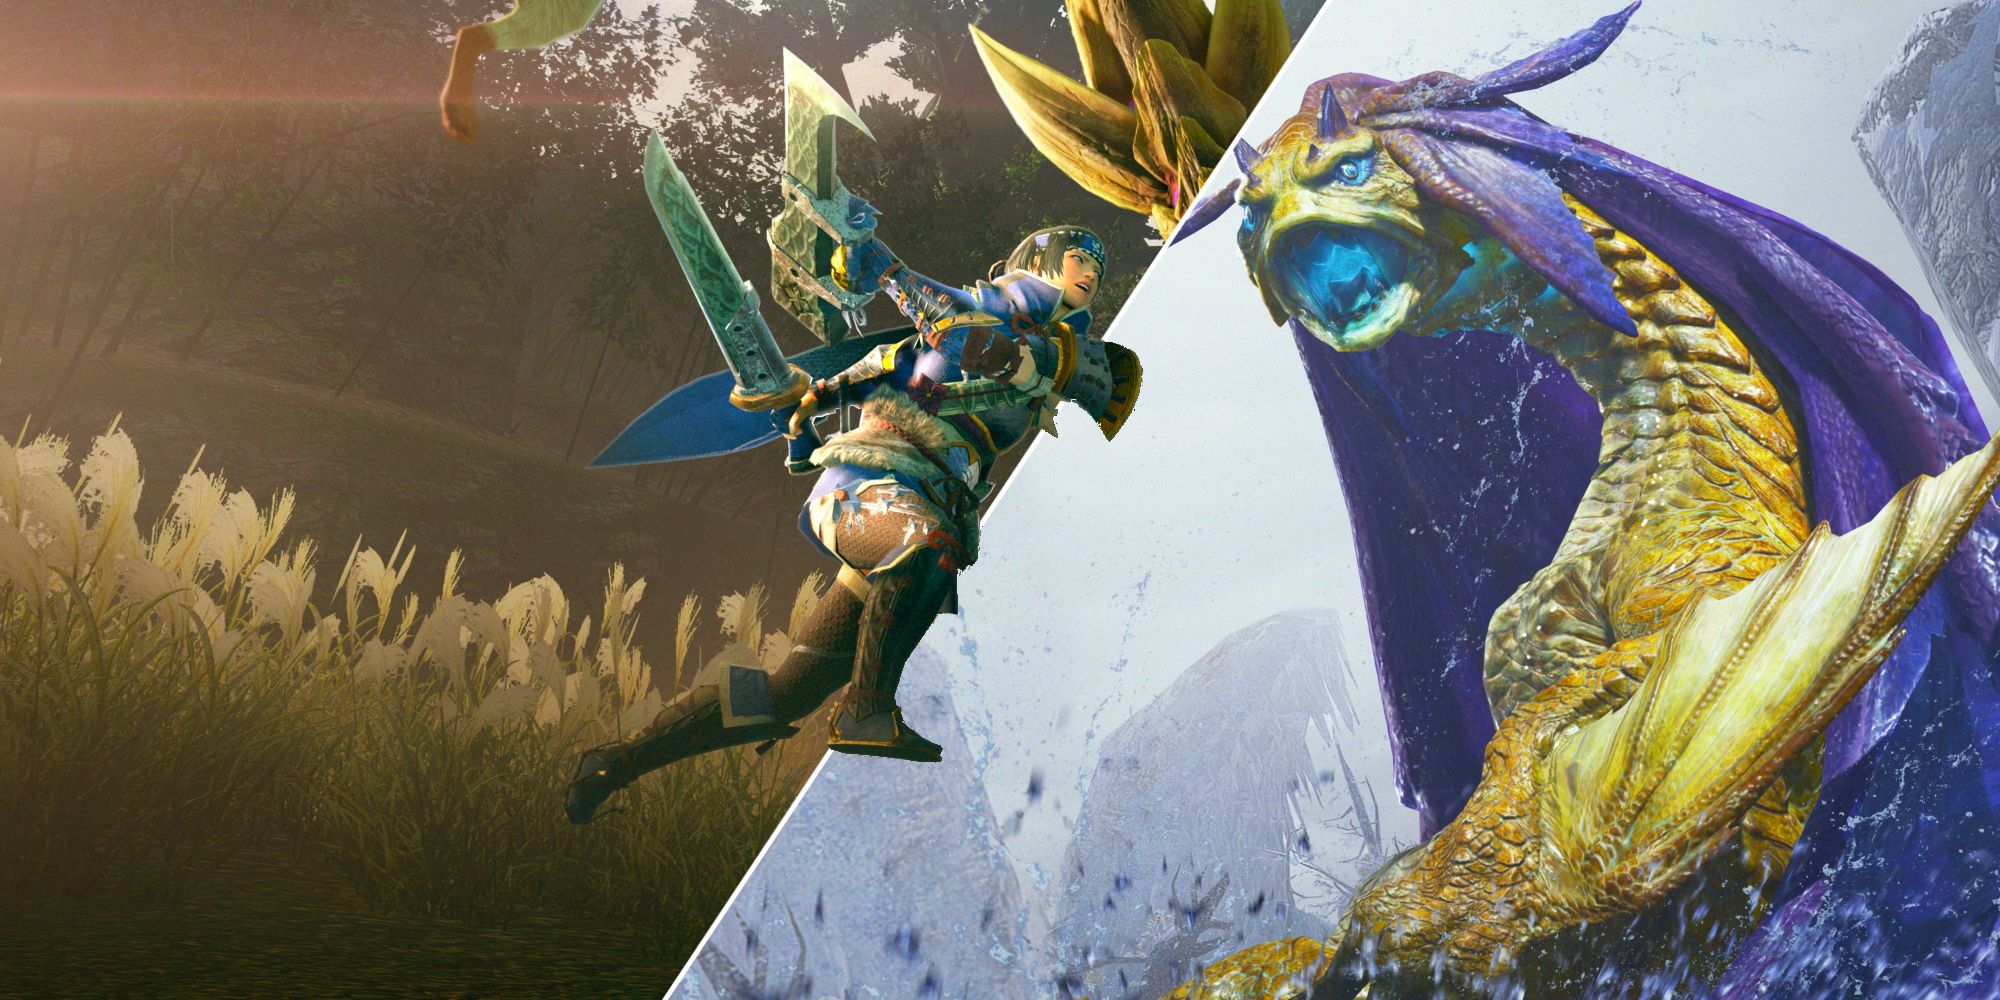 Monster Hunter Rise Featured Image (showing a split image that features a hunter leaping across one panel, from a forested environment, into another, with a watery environment)